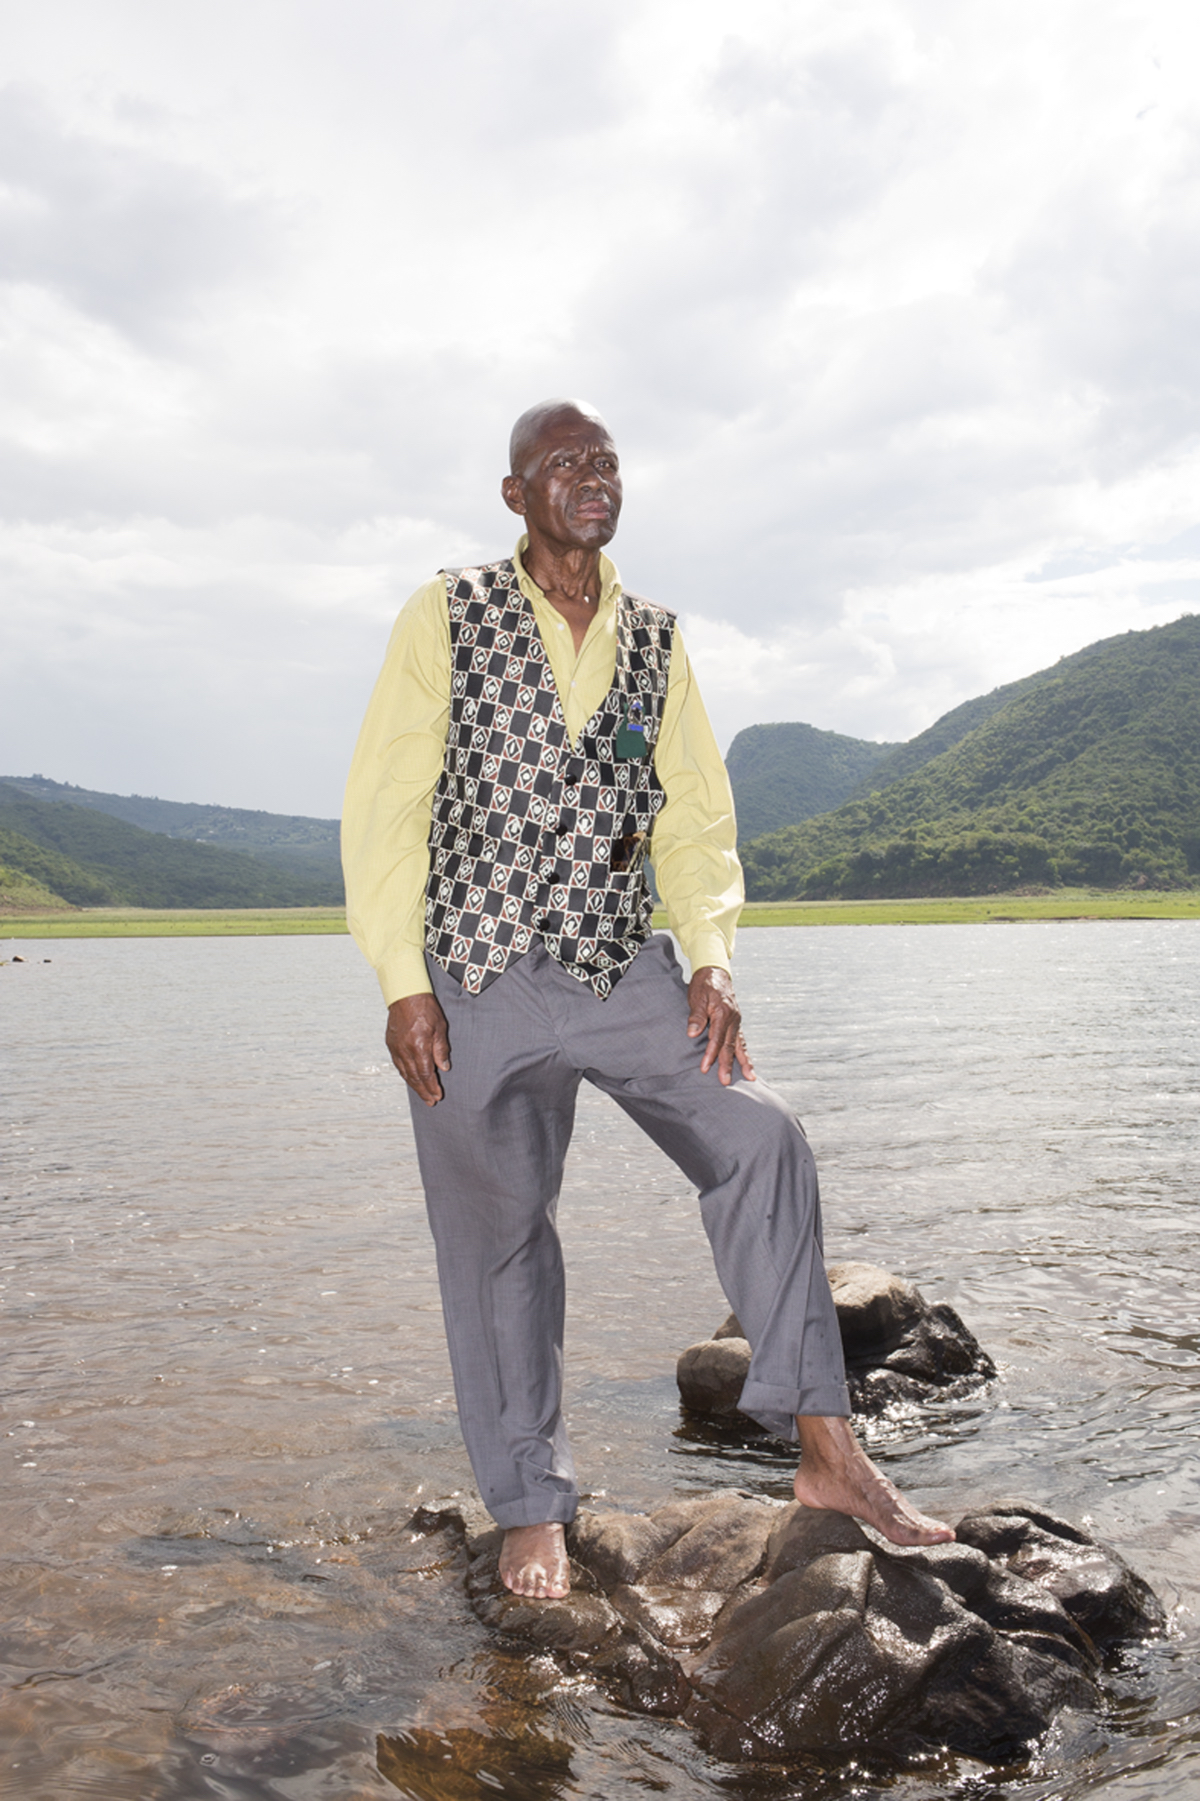 Giya Makondo-Wills, “They Came From The Water While The World Watched” – Elderly man wearing a yellow shirt, a chequered waistcoat and tailored grey trousers, standing barefoot on a rock in the middle of a river